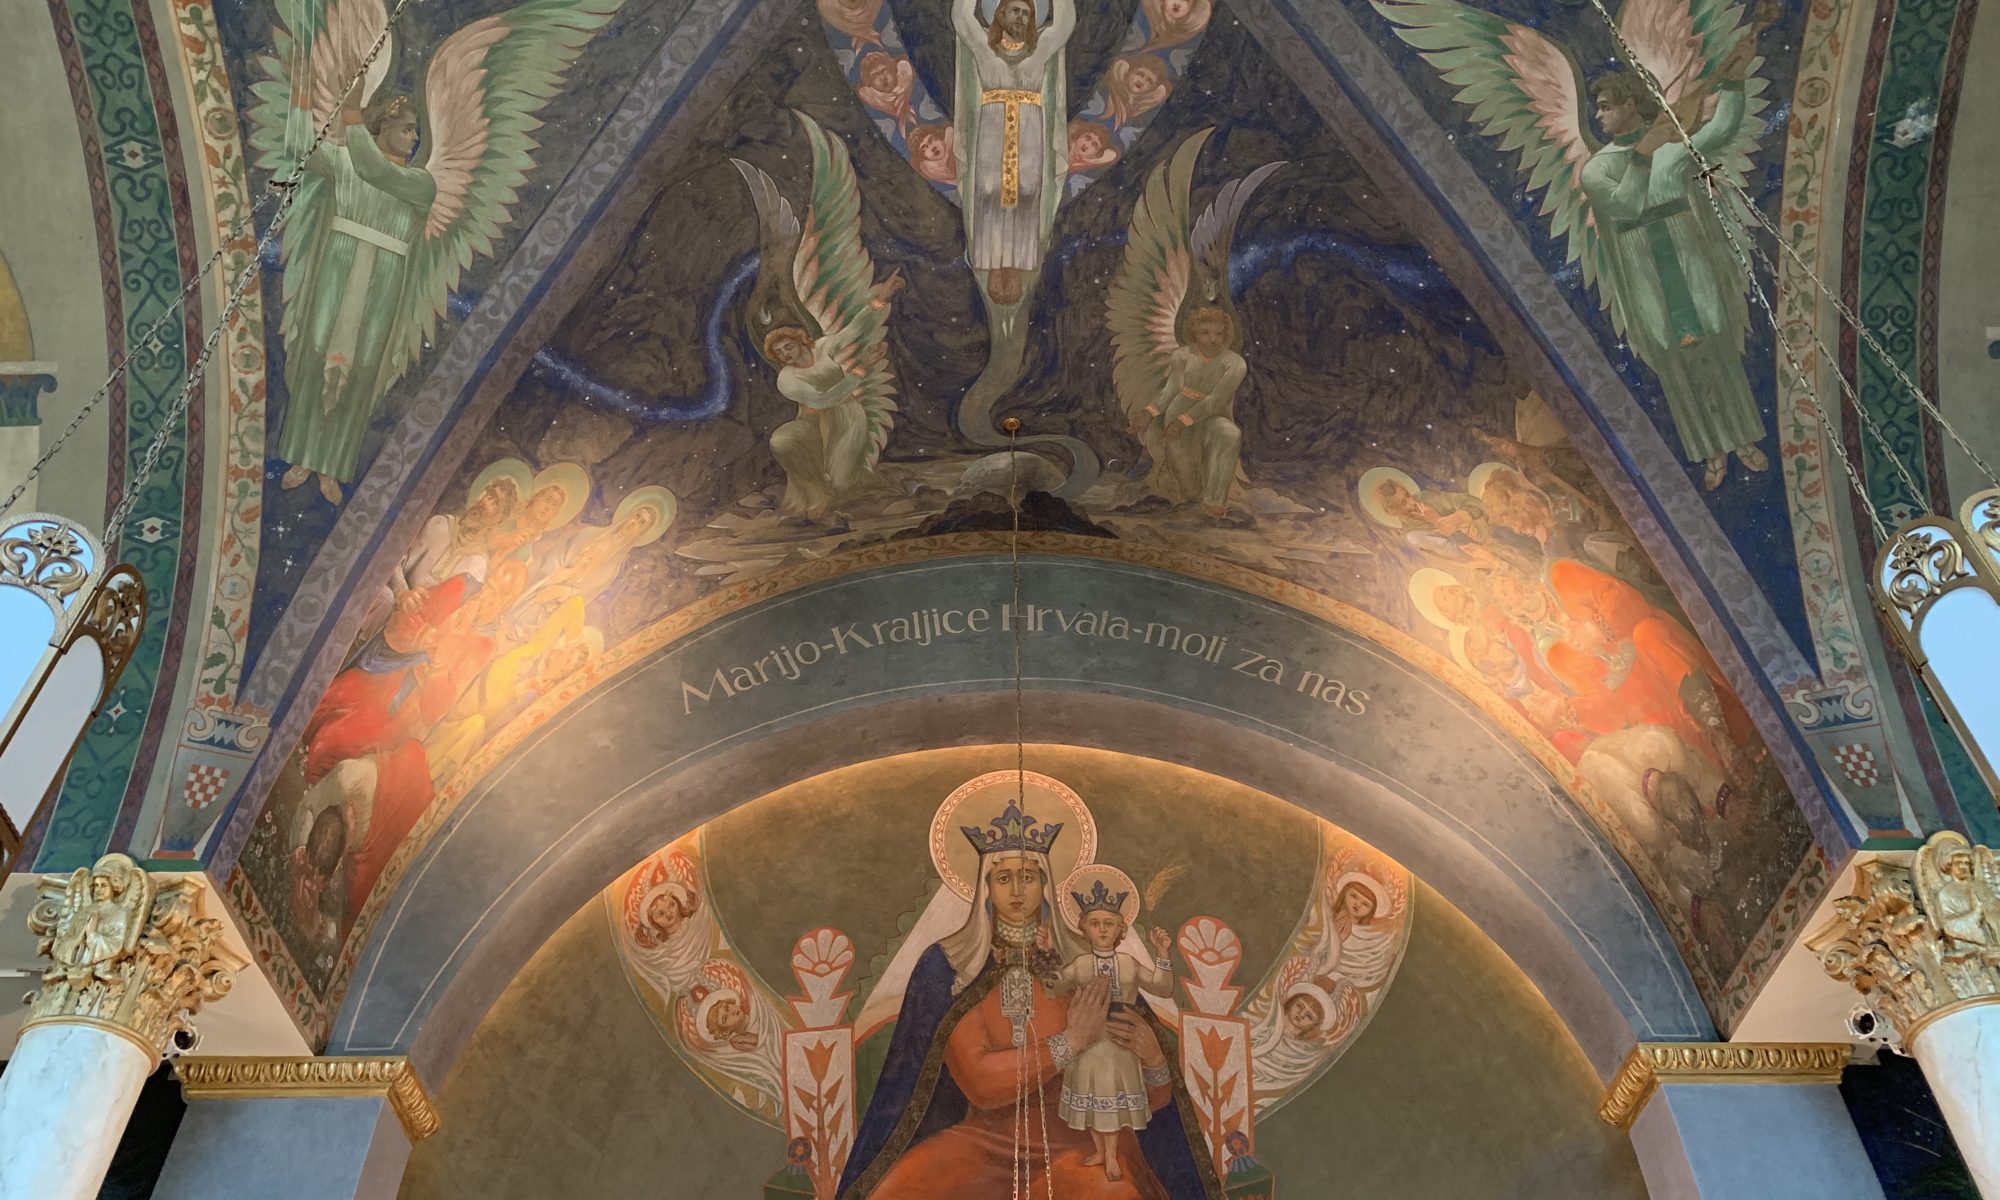 Photo of a church ceiling painted by artist Maxo Vanka depicting Mother Mary wearing a red robe and Baby Jesus on her lap, Jesus ascending to heaven above her